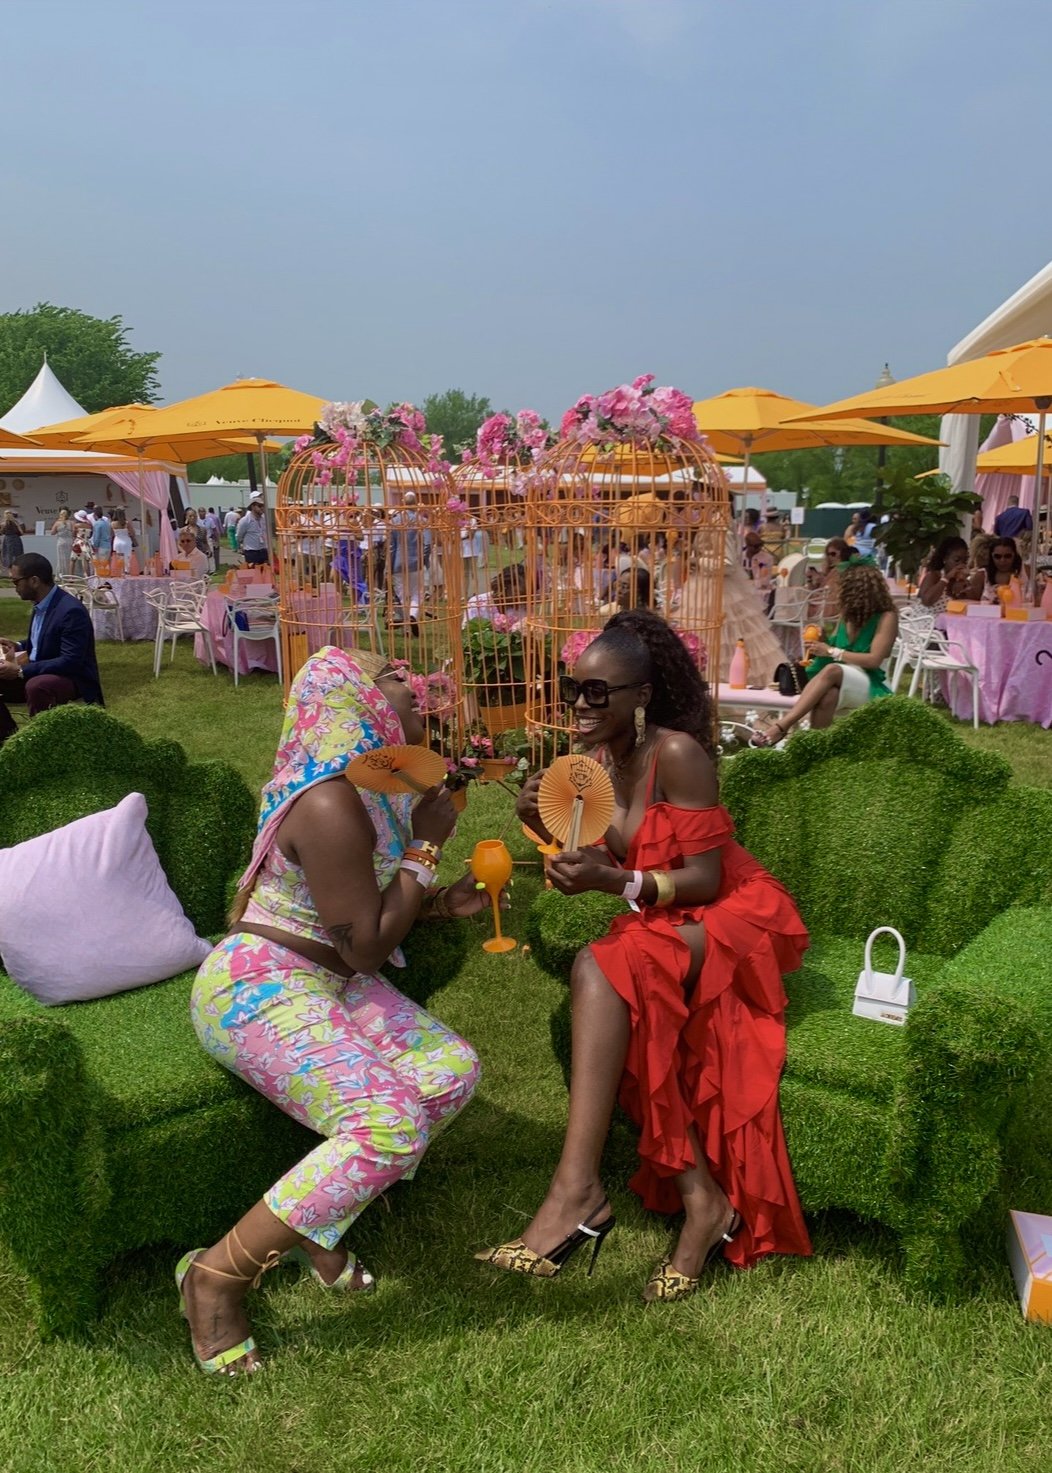 Veuve Clicquot Polo Classic Party — Herb Your Enthusiasm LLC